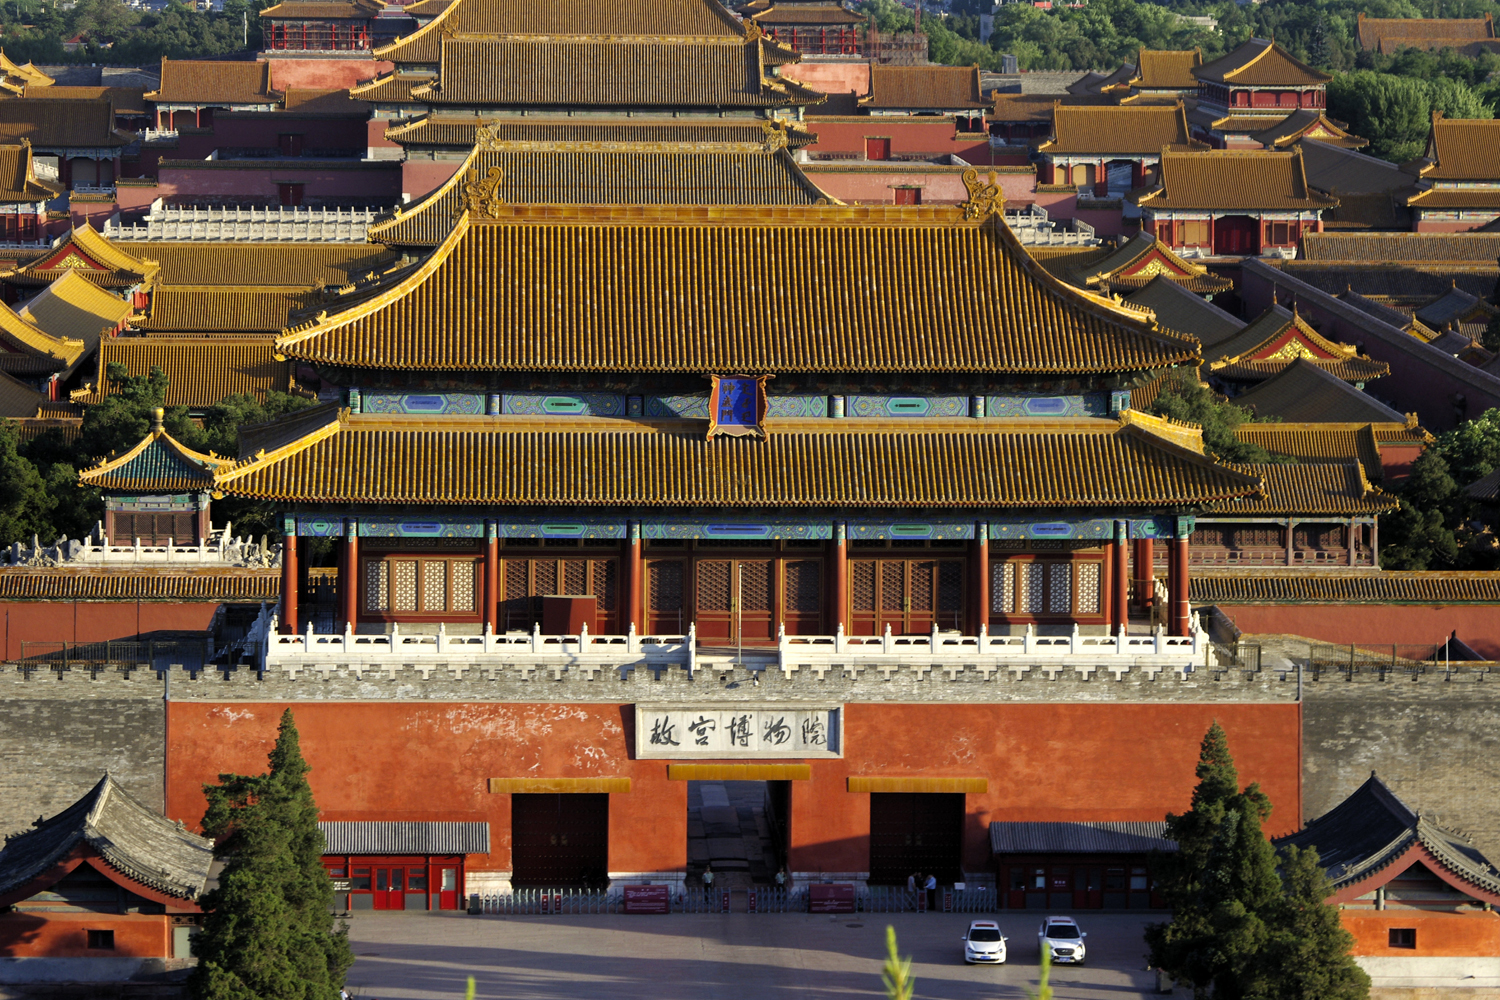 How China's Forbidden City treasures were saved during 1930s war with Japan  : NPR